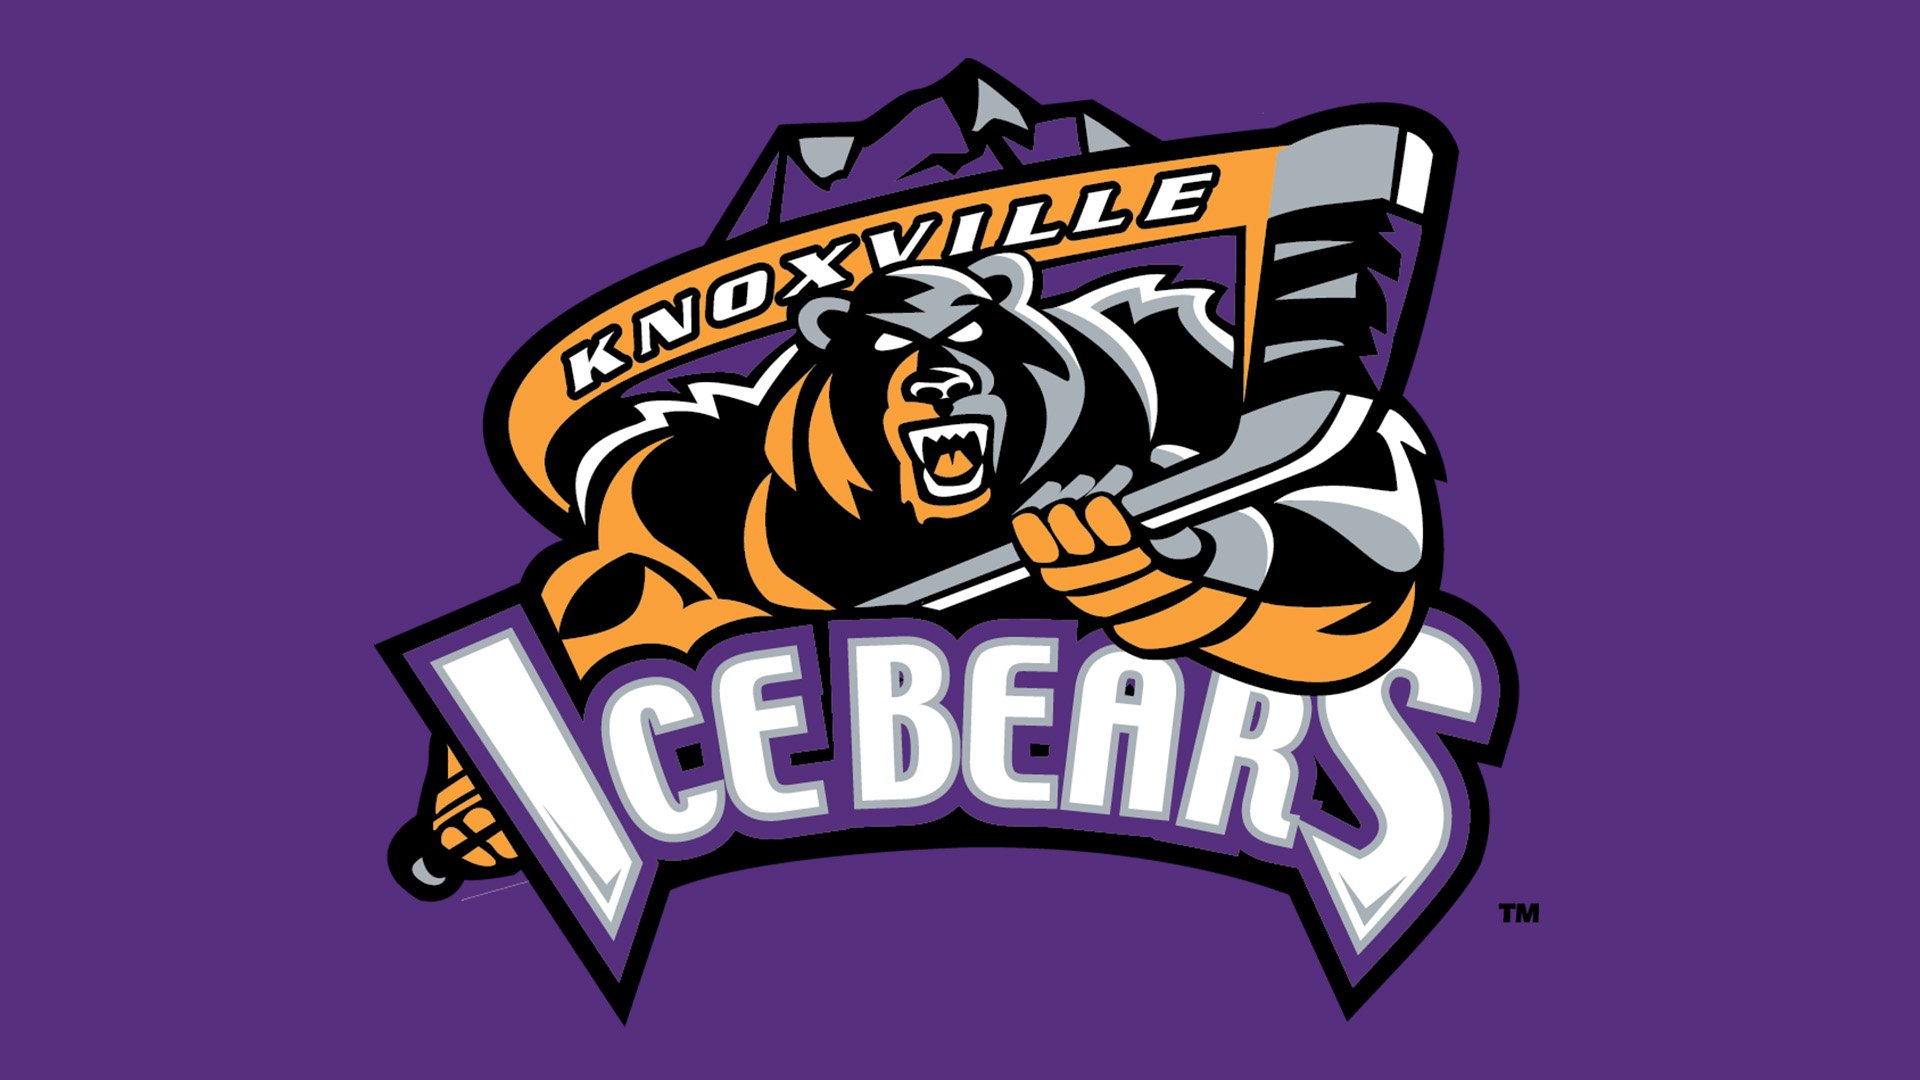 Knoxville Ice Bears - Knoxville, TN